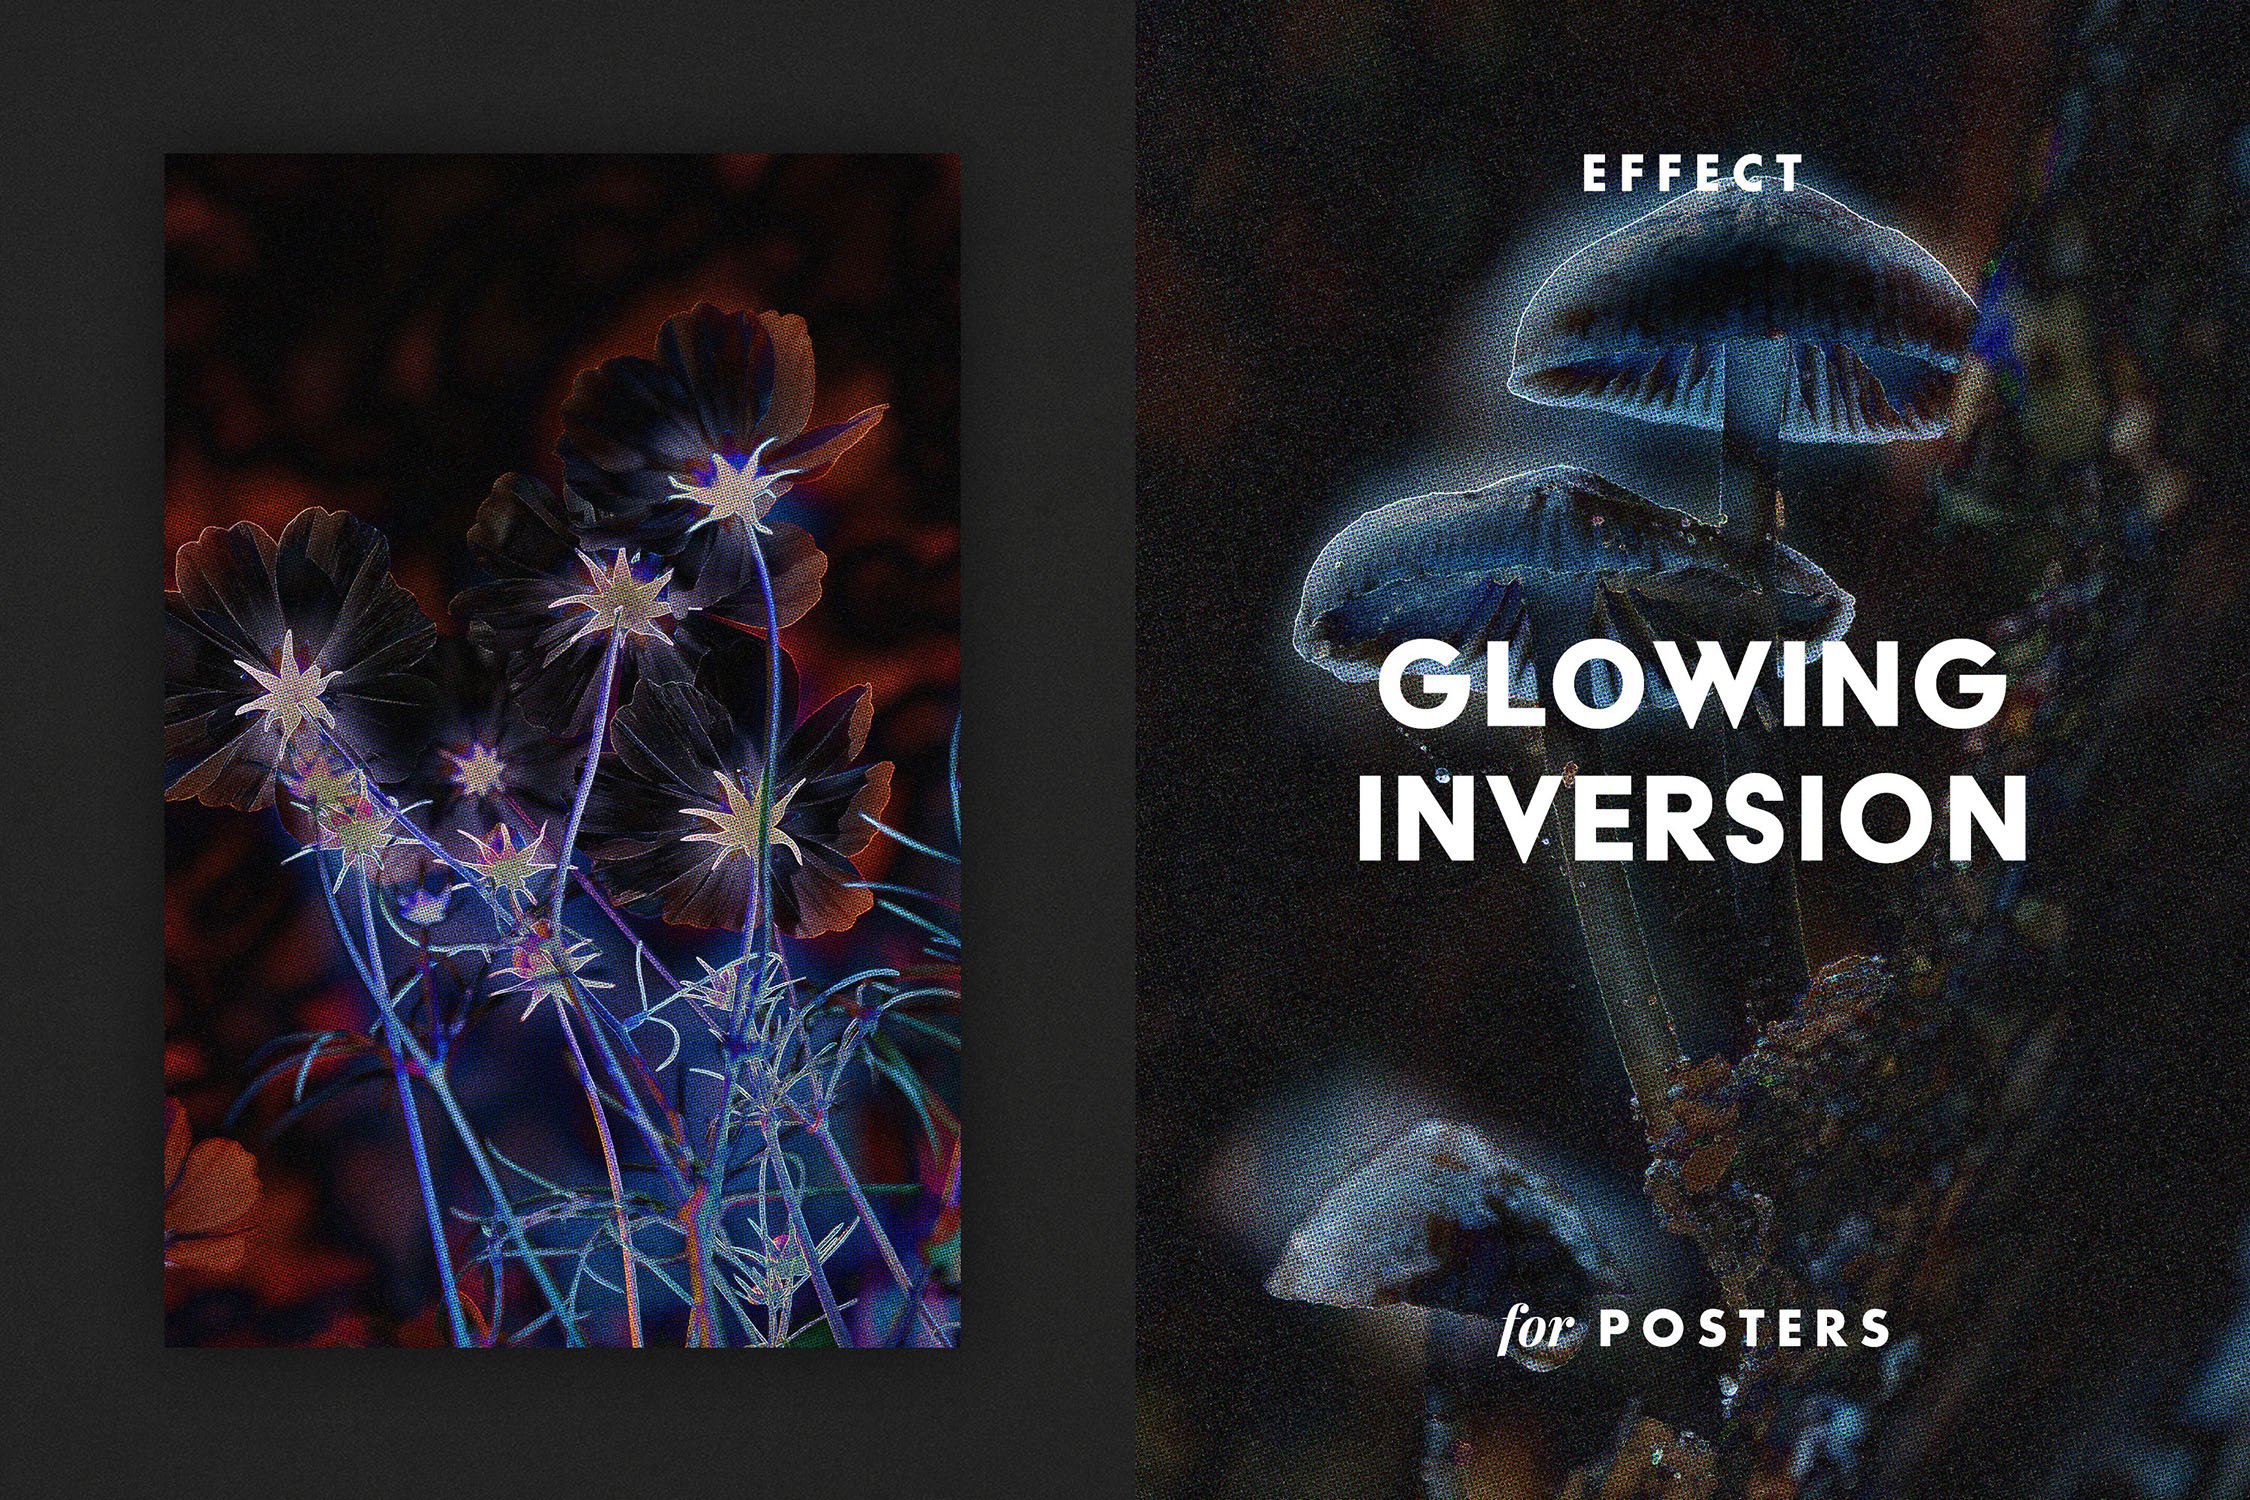 Glowing Inversion Effect for Posterscover image.